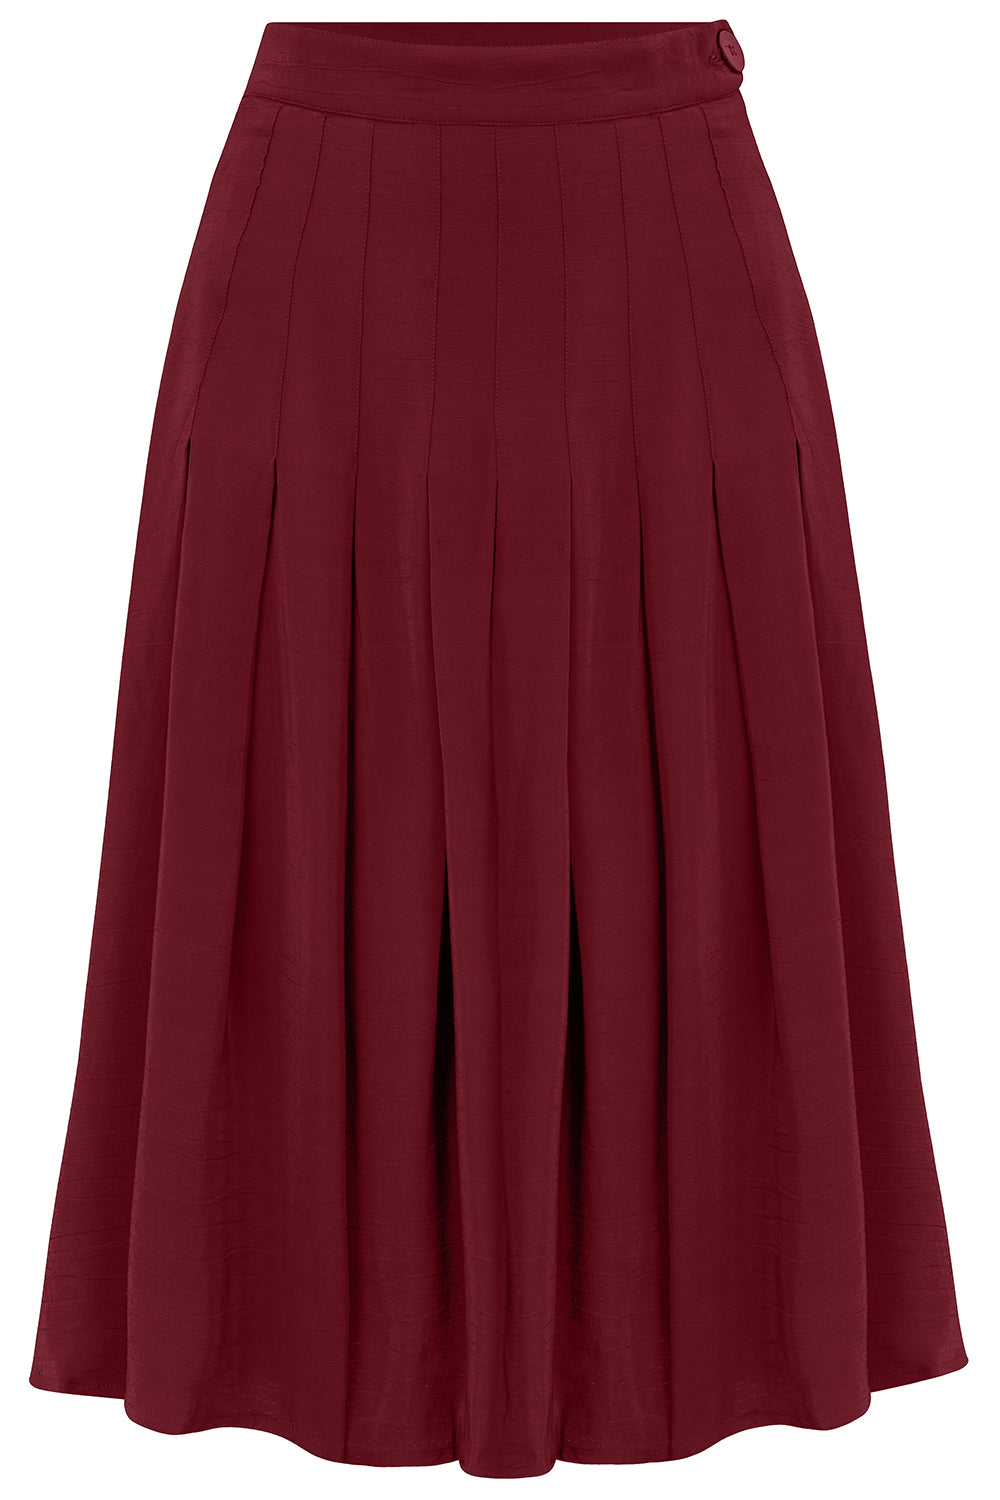 The "Lucille" Pleated Skirt in Windsor Wine, Classic & Authentic 1940s Vintage Inspired Style - CC41, Goodwood Revival, Twinwood Festival, Viva Las Vegas Rockabilly Weekend Rock n Romance The Seamstress Of Bloomsbury